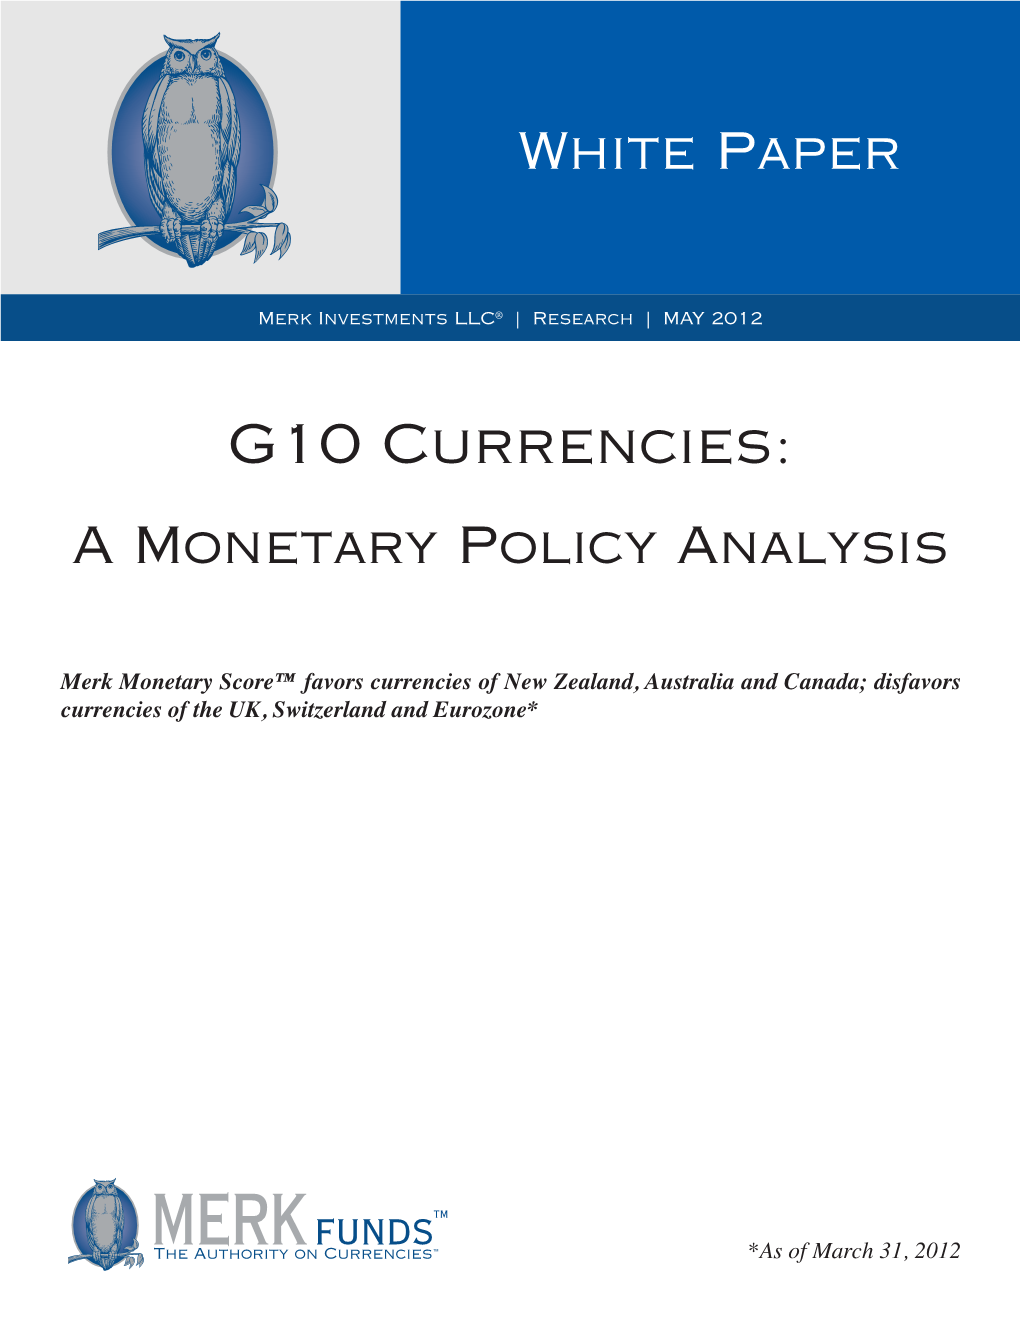 G10 Currencies: a Monetary Policy Analysis